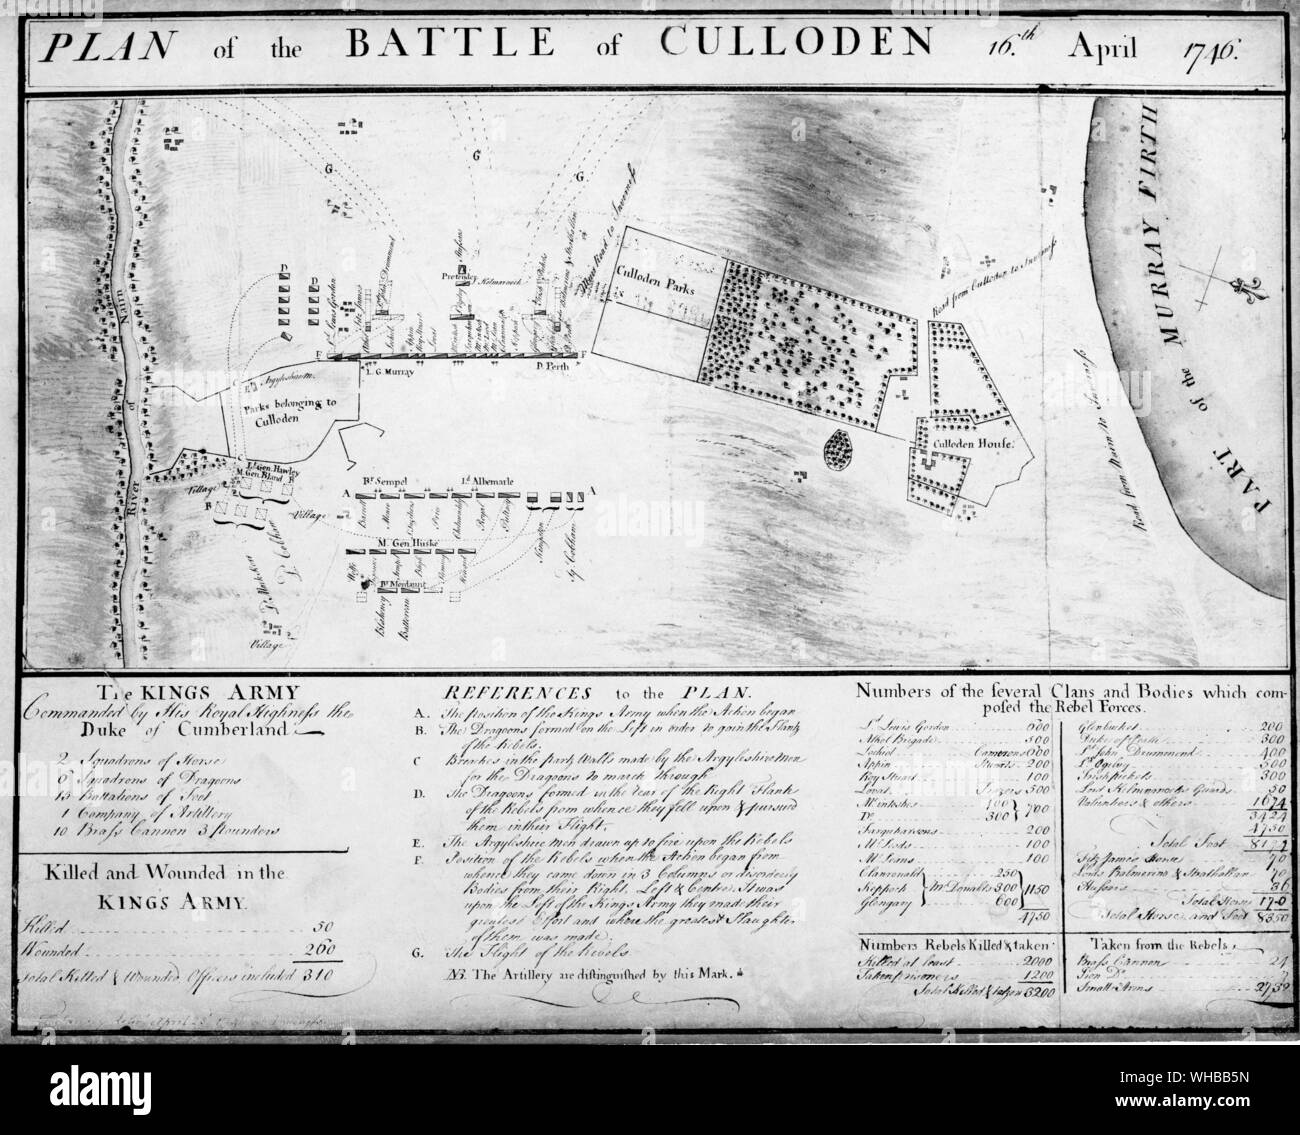 Plan of the Battle of Culloden 10 April 1746 - T. Sandby from the Print Room at Windsor Castle.. The Battle of Culloden (Scottish Gaelic: Blàr Chùil Lodair) (April 16, 1746) was the final clash between the French-supported Jacobites and the Hanoverian British Government in the 1745 Jacobite Rising. It was the last battle to be fought on mainland Britain. Culloden brought the Jacobite cause - to restore the House of Stuart to the throne of the Kingdom of Great Britain - to a decisive defeat. The Jacobites - most of them Highland Scots - supported the claim of James Francis Edward Stuart (aka Stock Photo